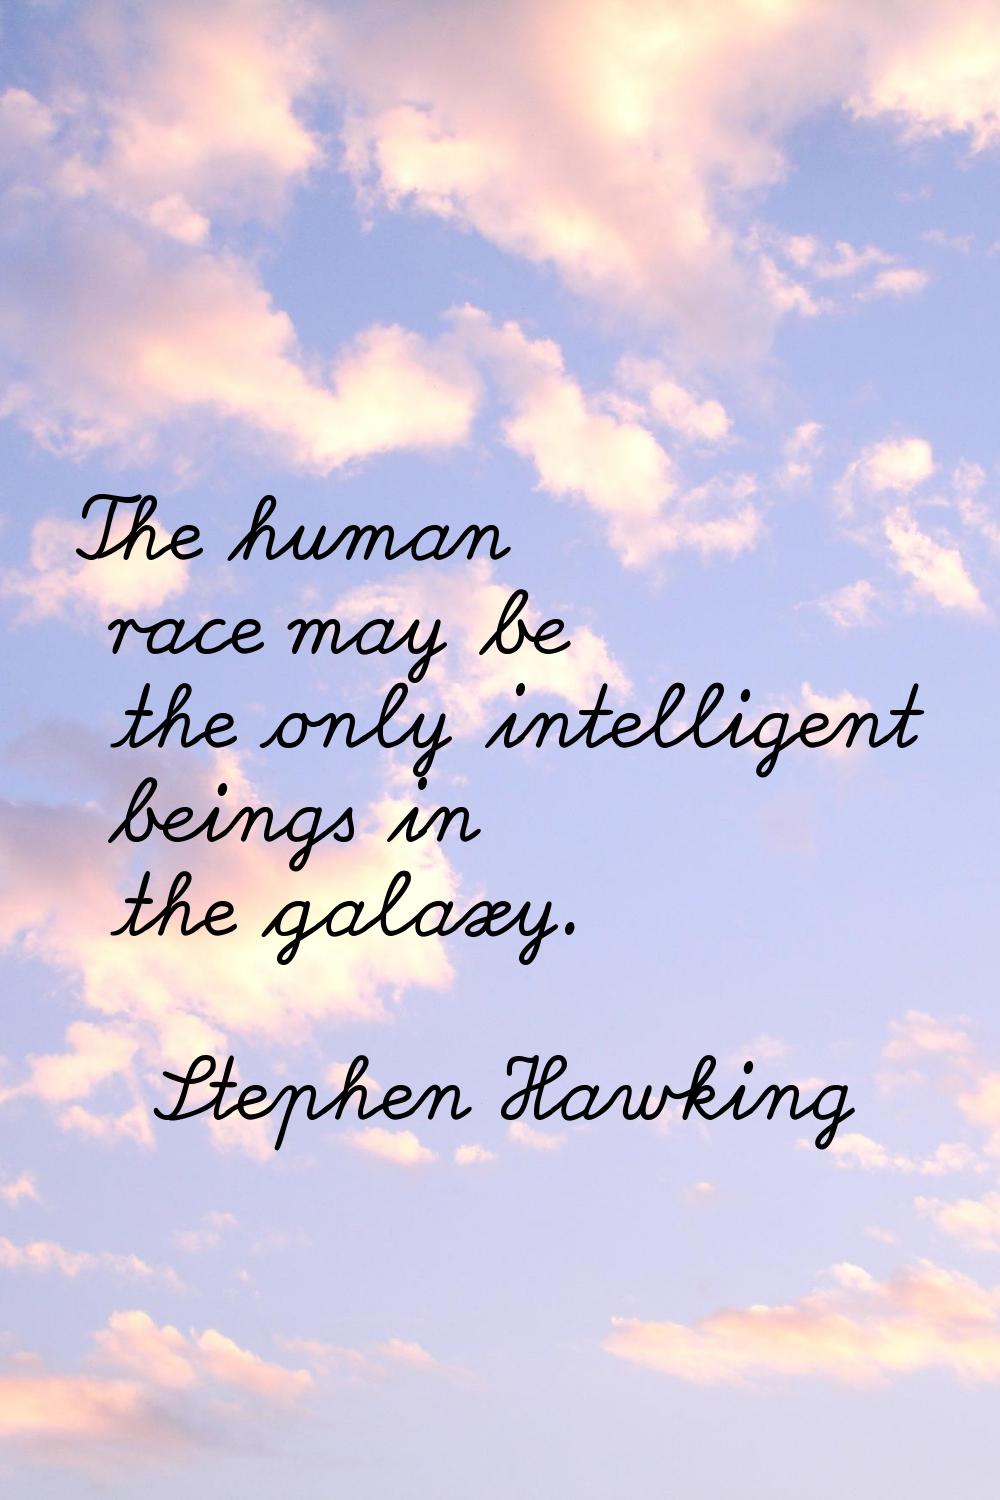 The human race may be the only intelligent beings in the galaxy.